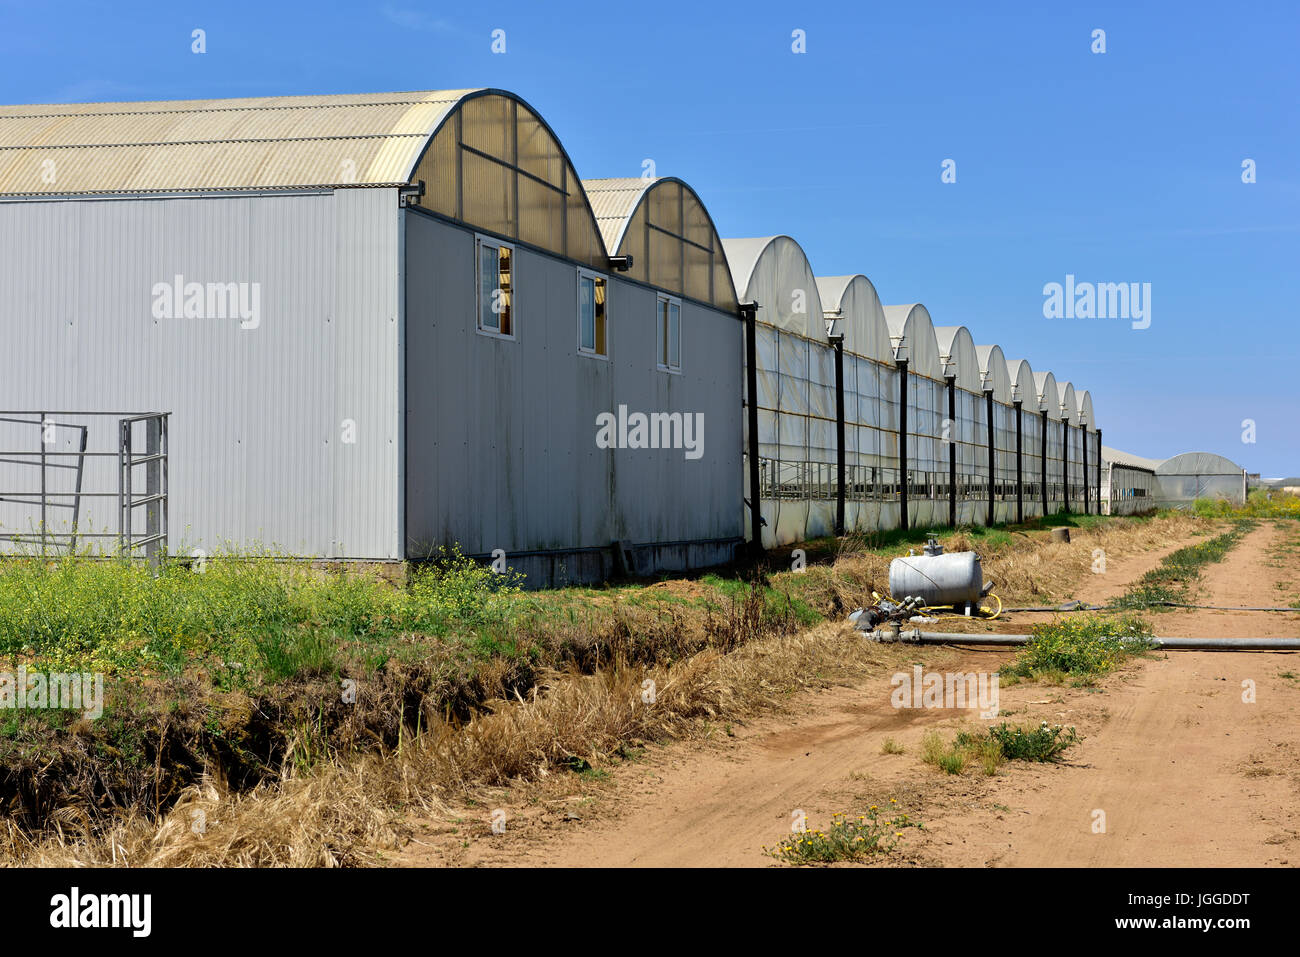 Rows of commercial agricultural greenhouses Stock Photo